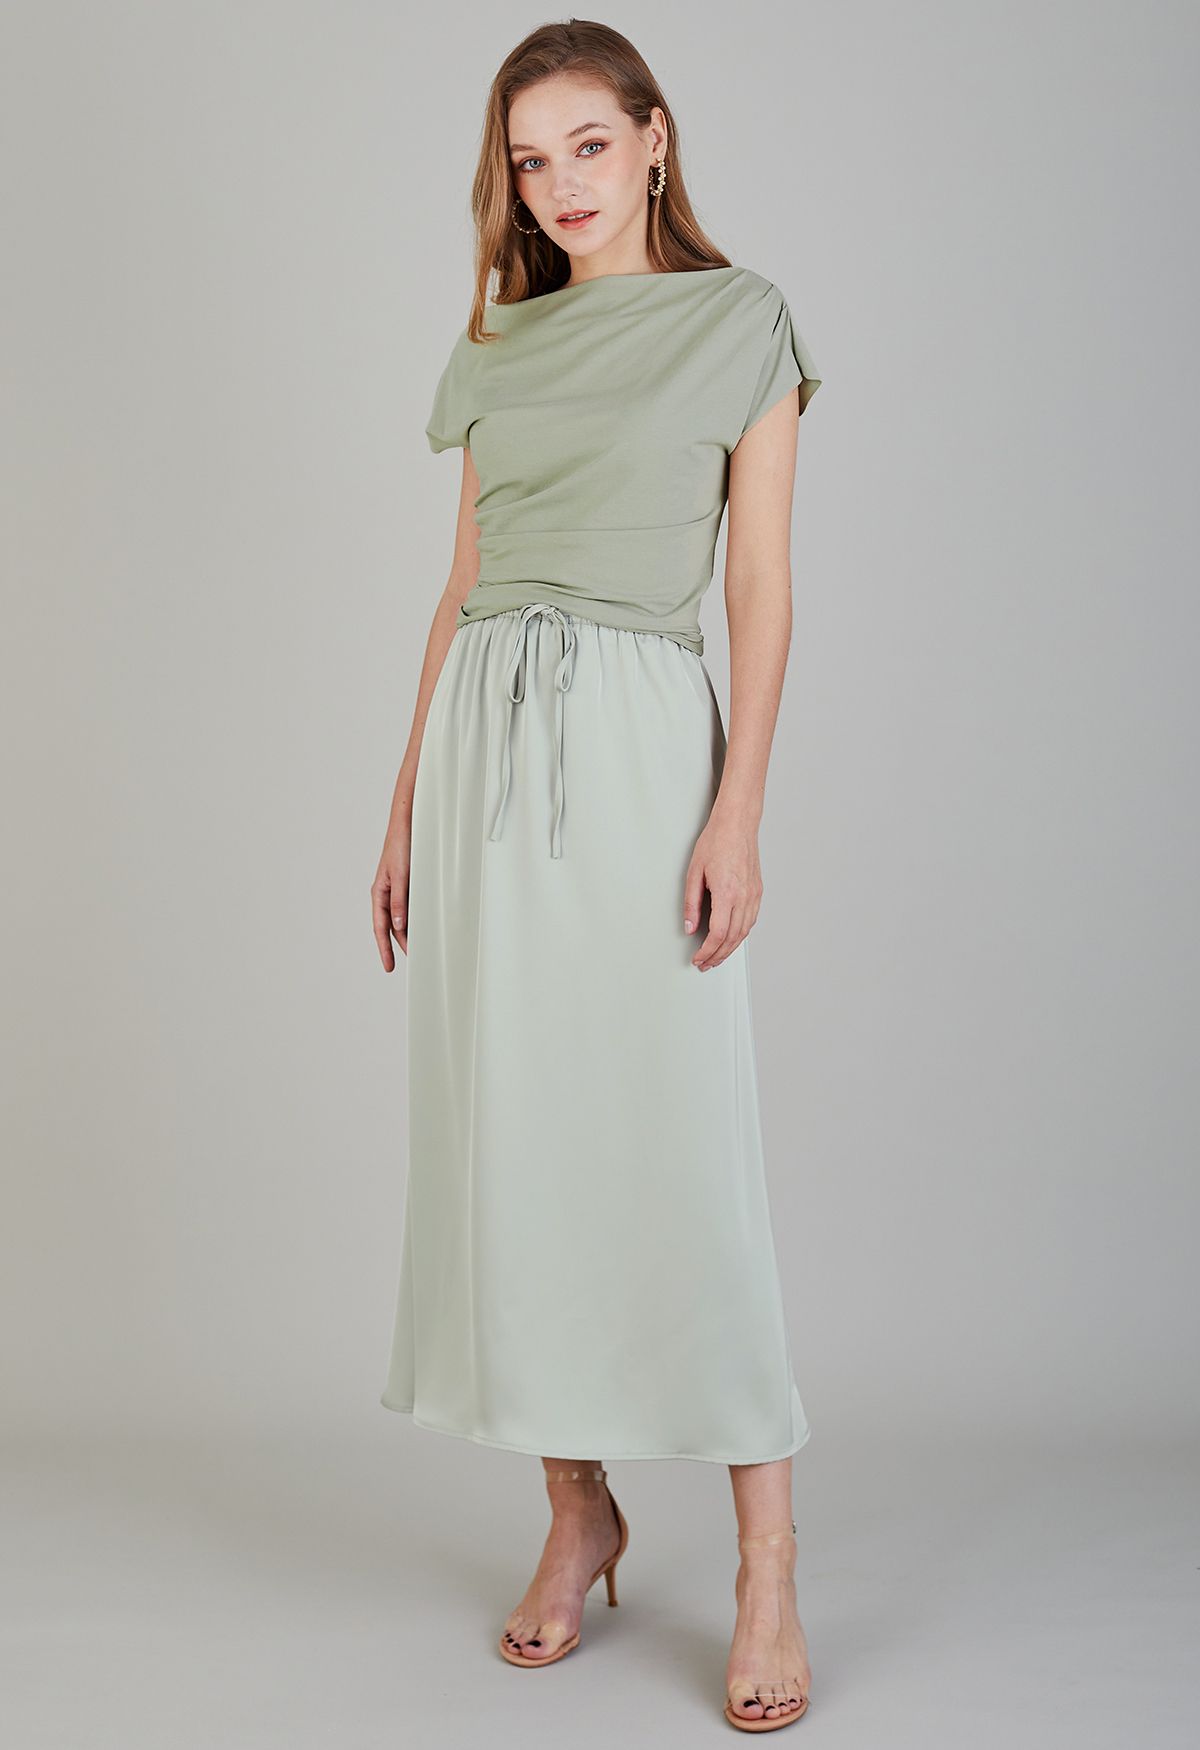 Asymmetric Boat Neck Ruched Top in Pea Green